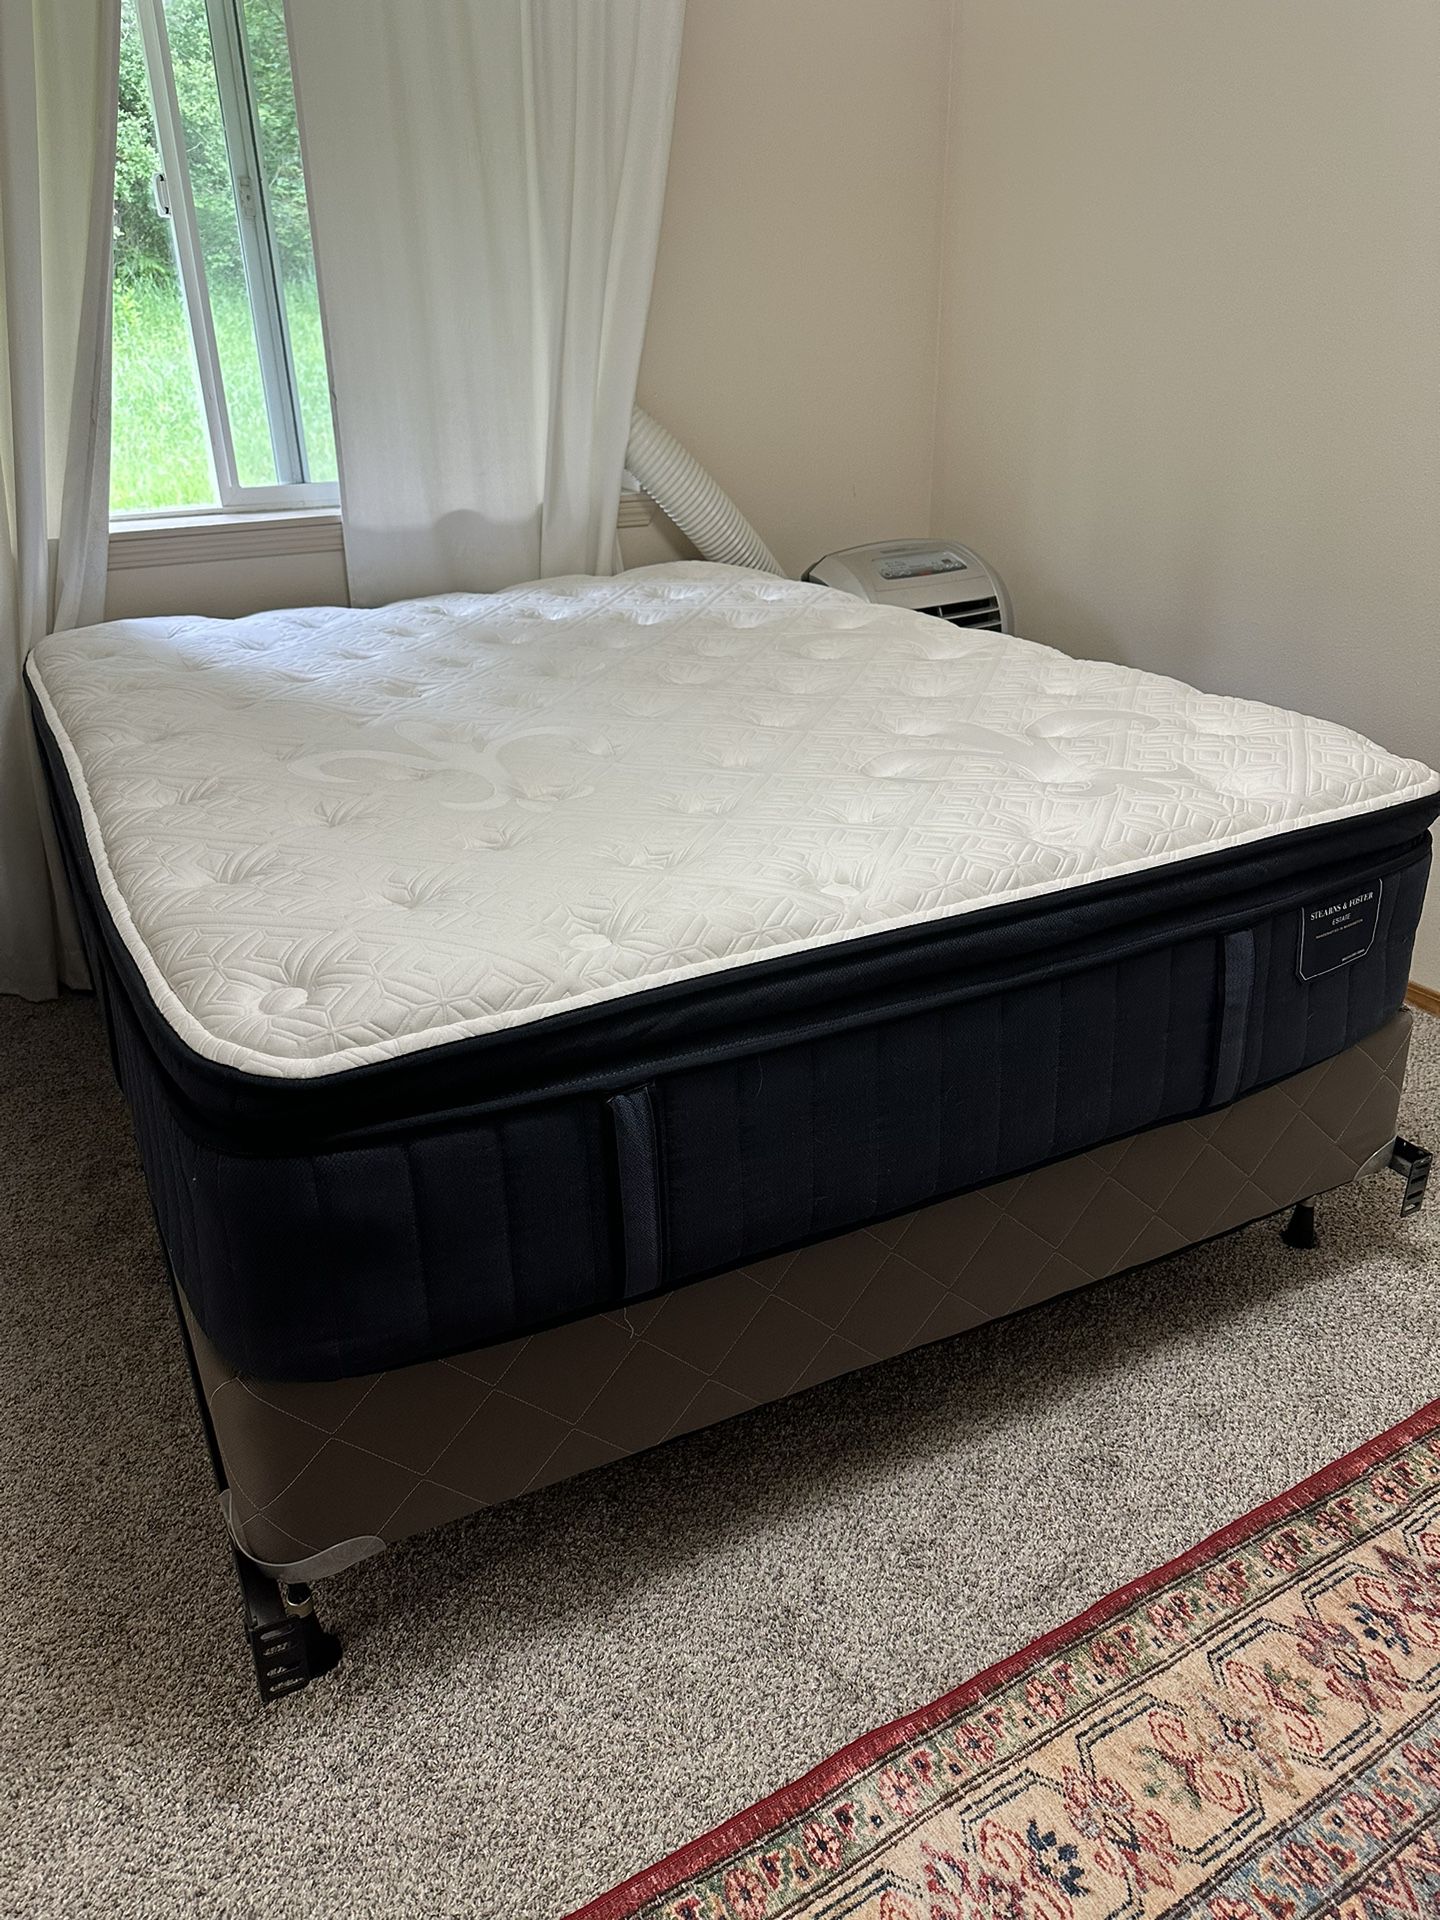 Stearns and Foster Queen Bed, Box Spring, Bed Frame, Mattress Protector, And Bed Skirt